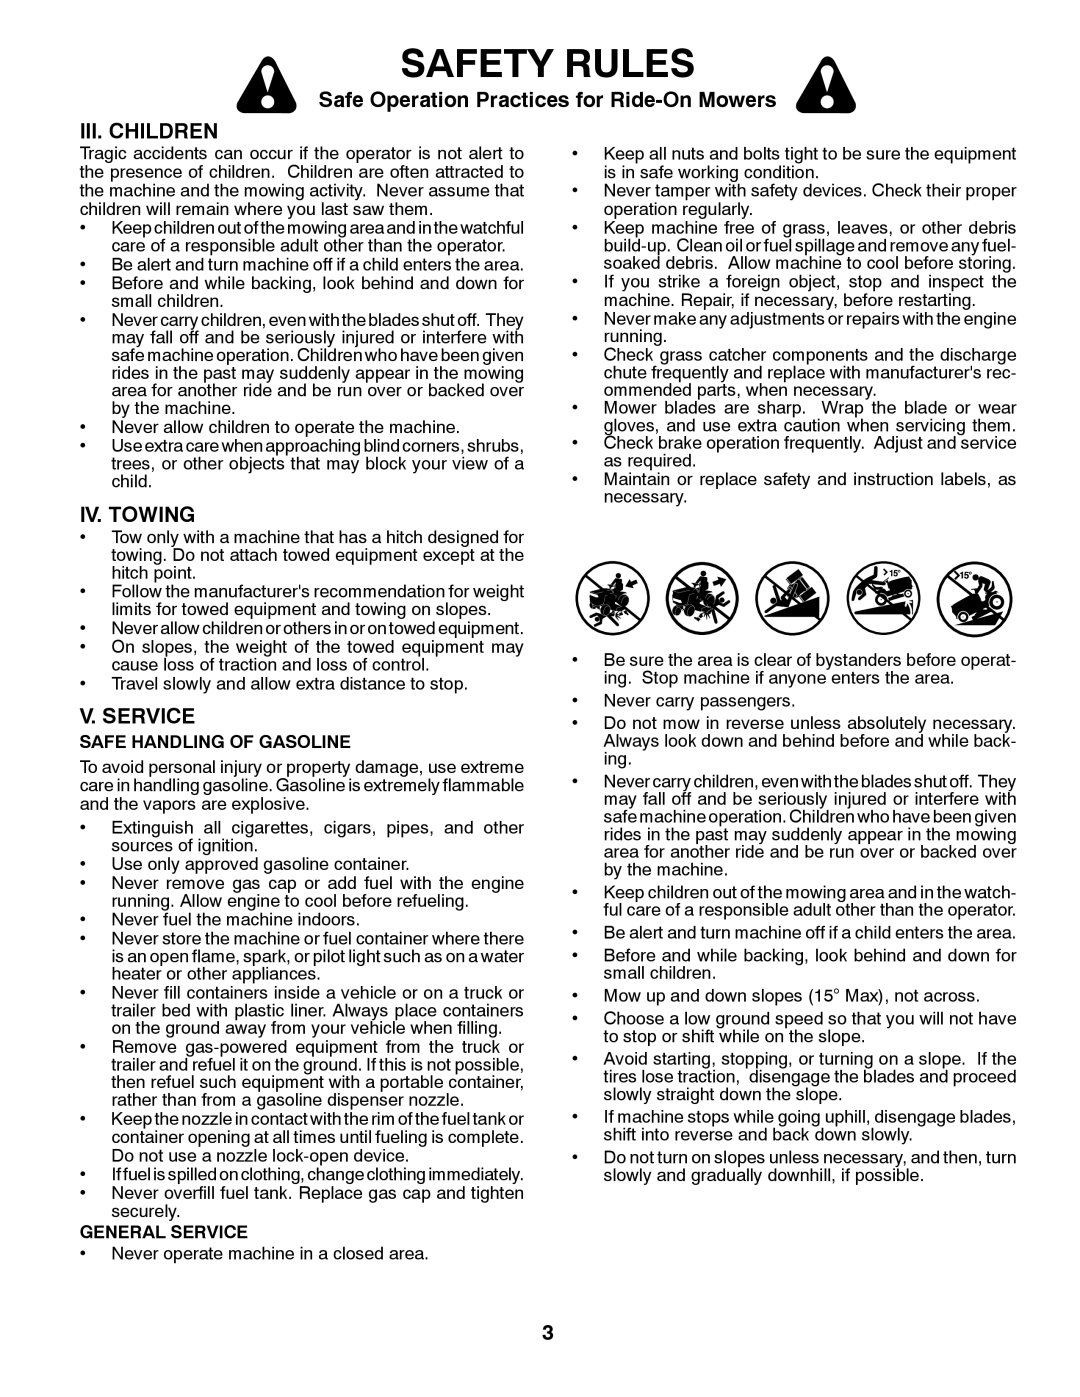 Husqvarna 532 44 00-55 Iii. Children, Iv. Towing, V. Service, Safety Rules, Safe Operation Practices for Ride-OnMowers 